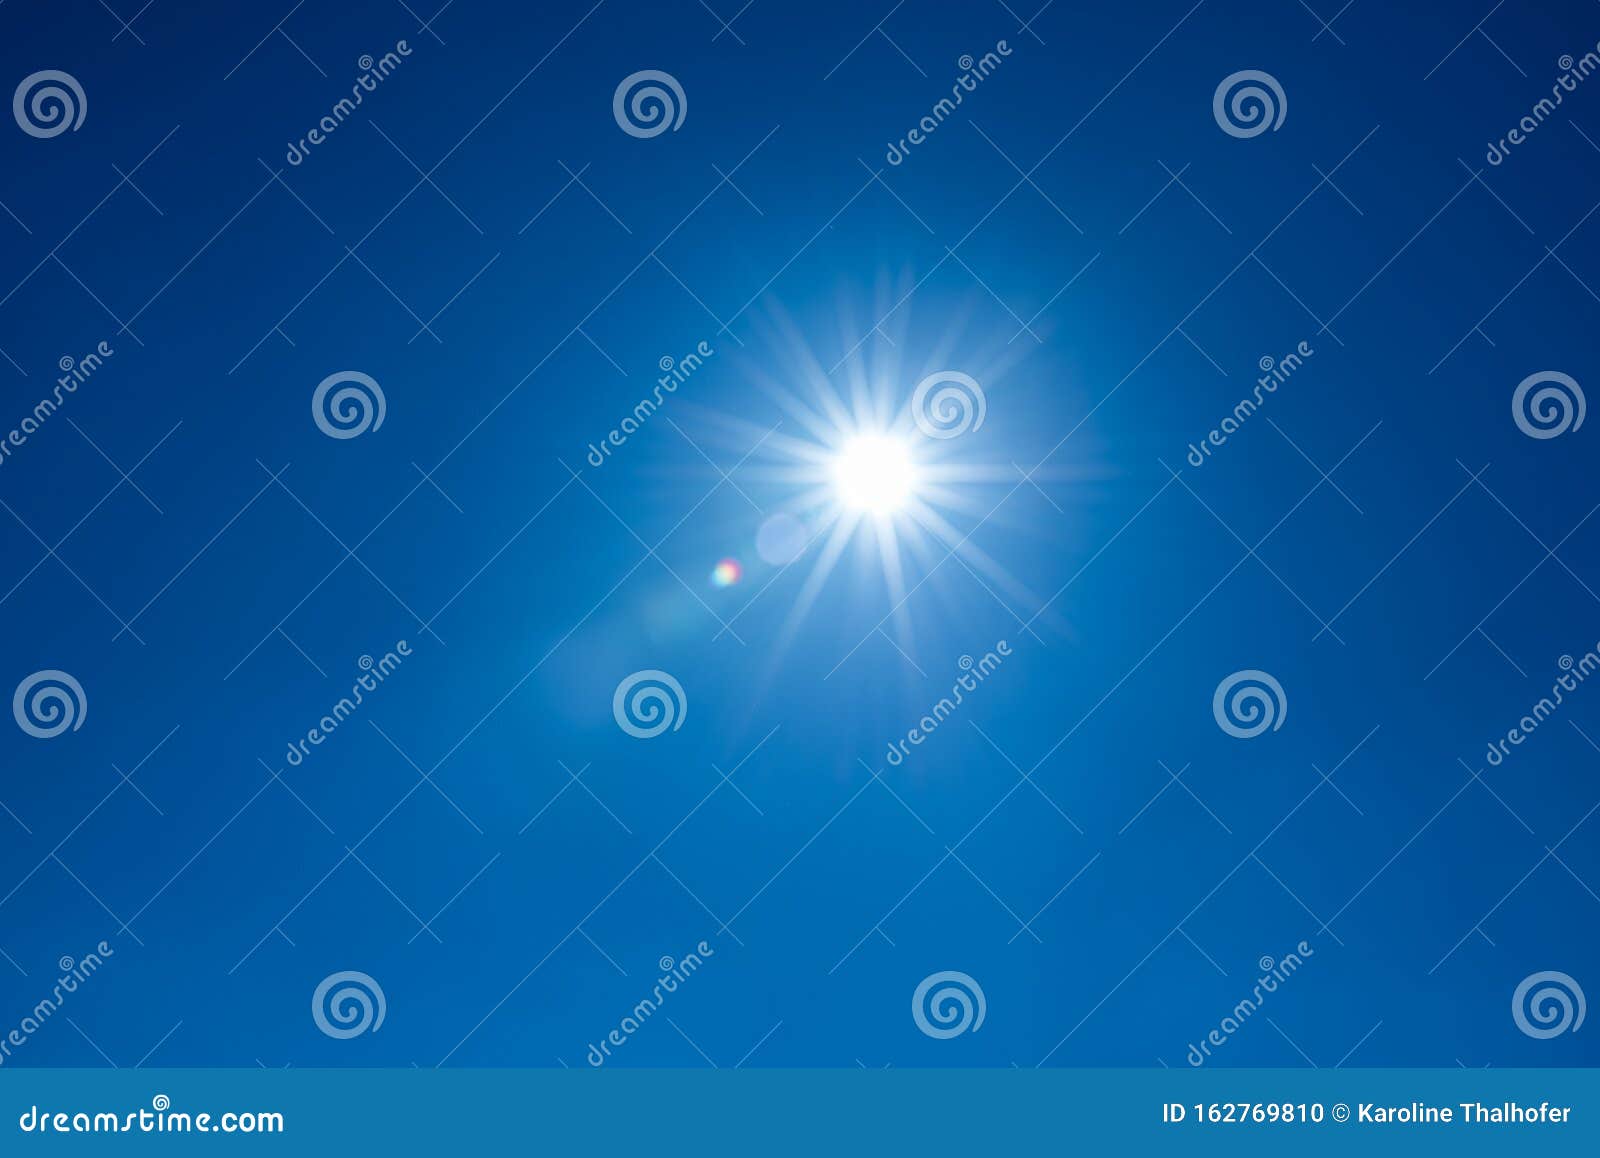 sun, sunbeams against blue sky - cloudless heaven. photography with lense flair effect